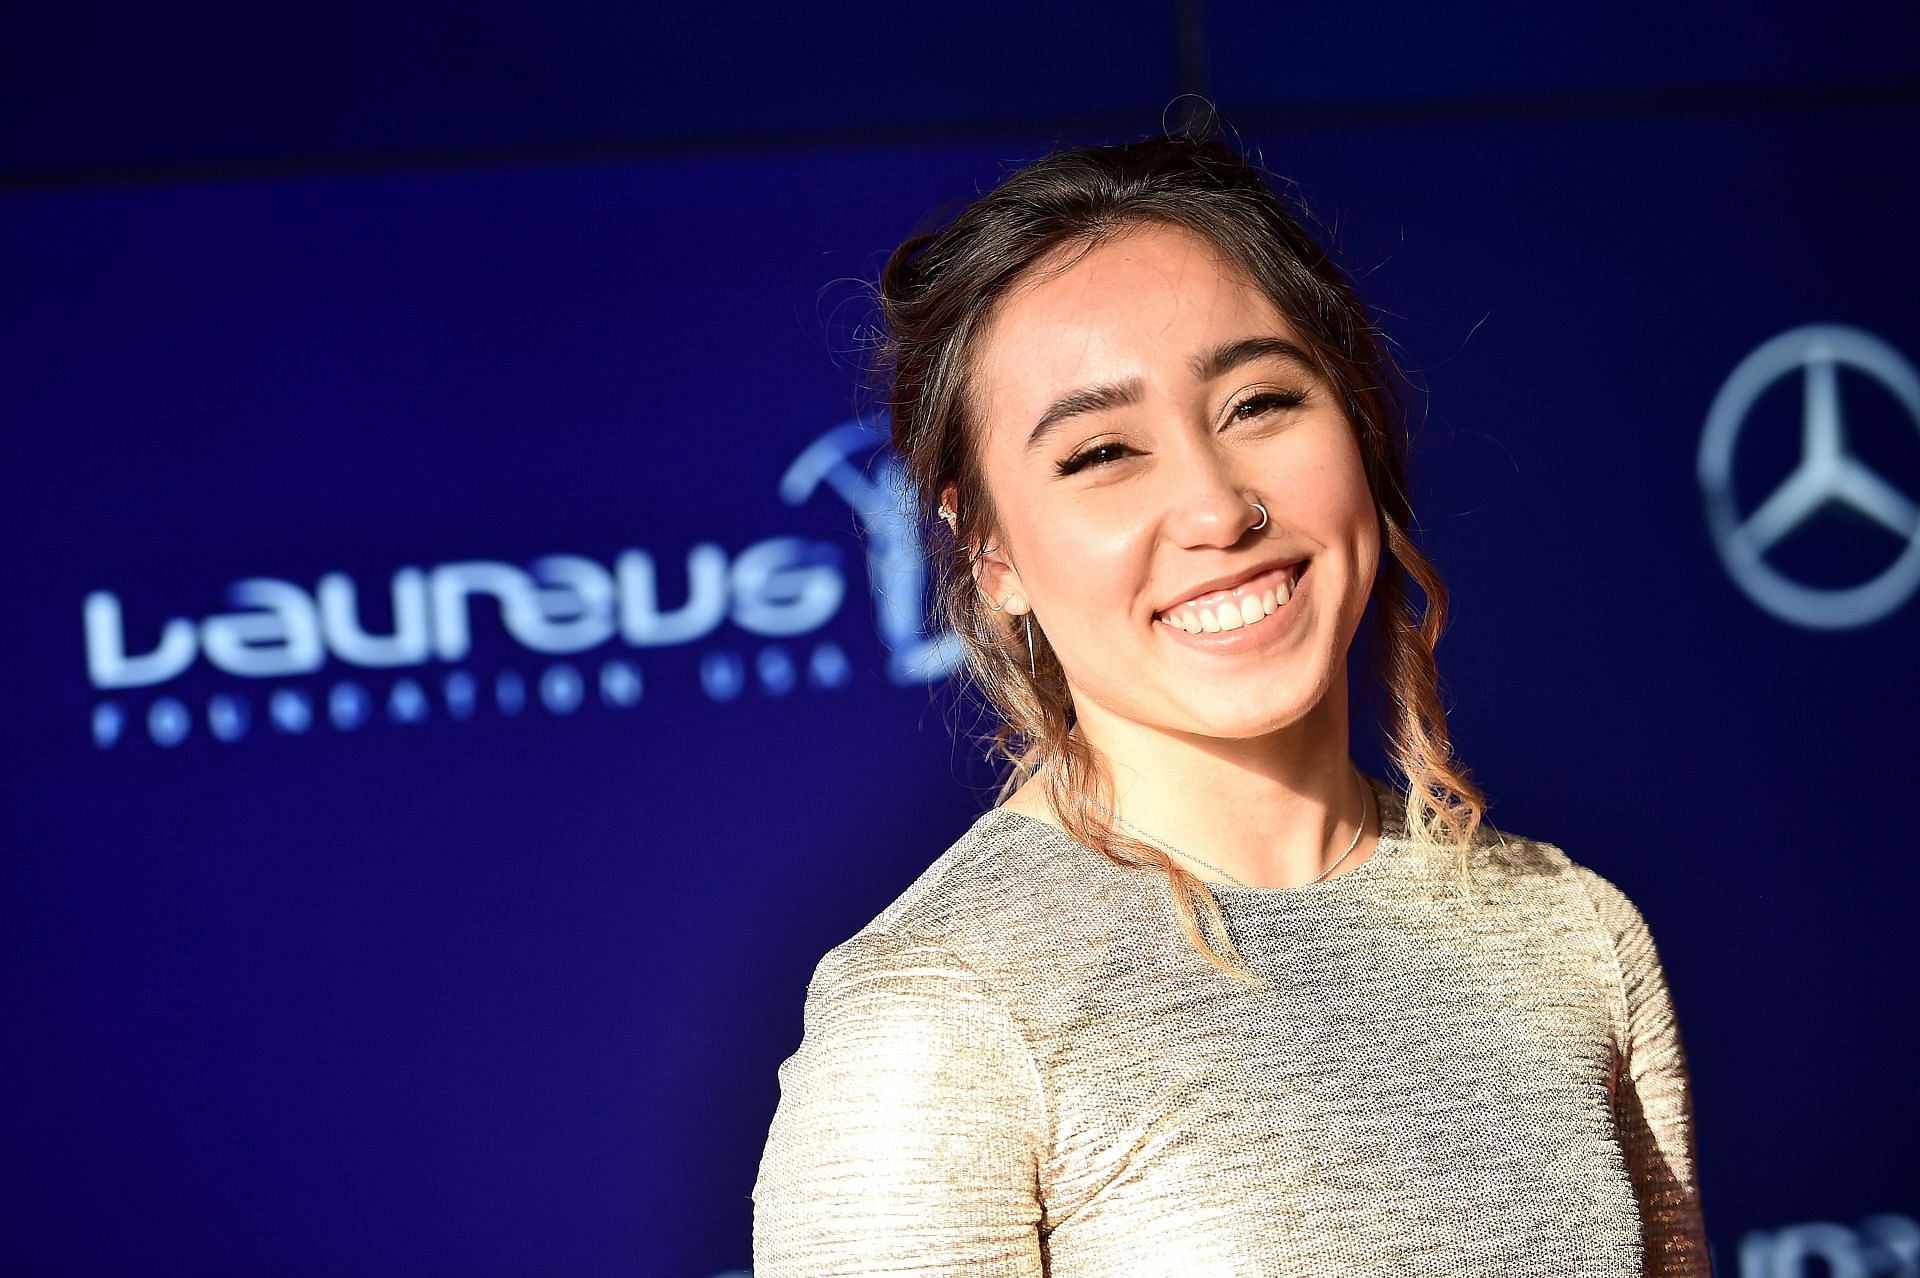 Katelyn Ohashi attends the 2019 Laureus Fashion Show Gala during New York Fashion Week in New York City.